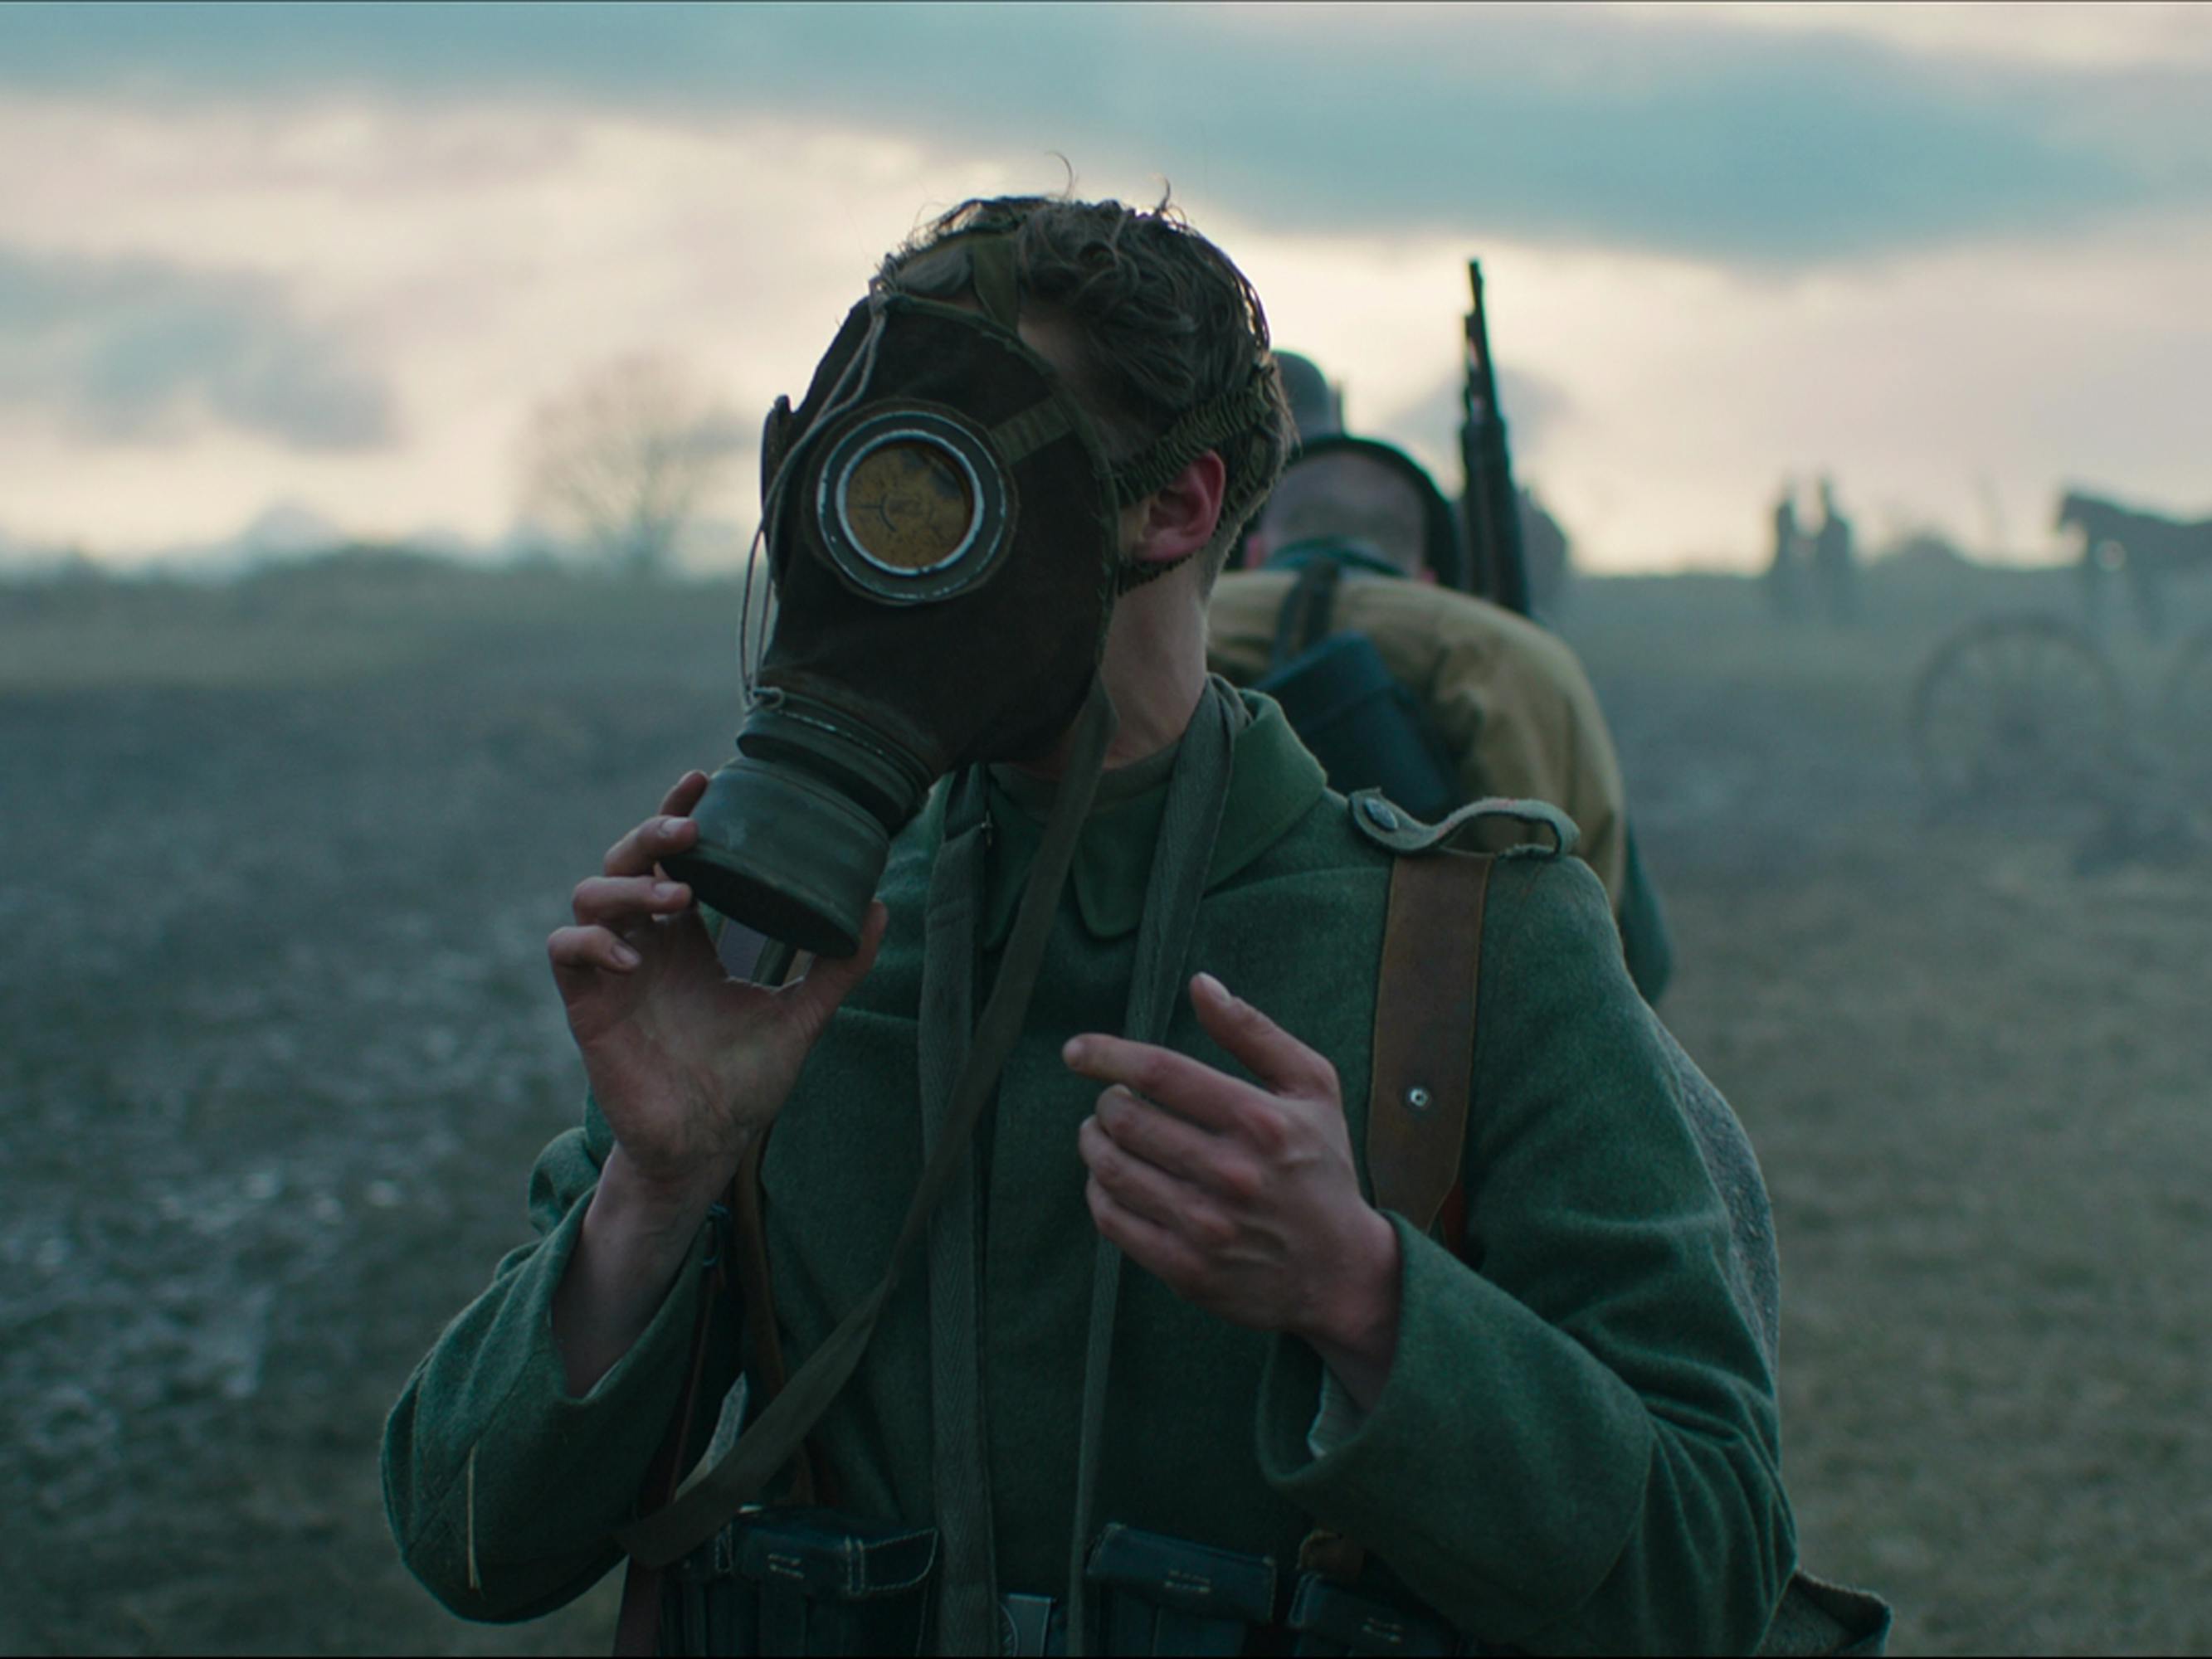 Paul Bäumer (Felix Kammerer) wears his bug-like gas mask as he walks in a line of other soldiers through a barren field.